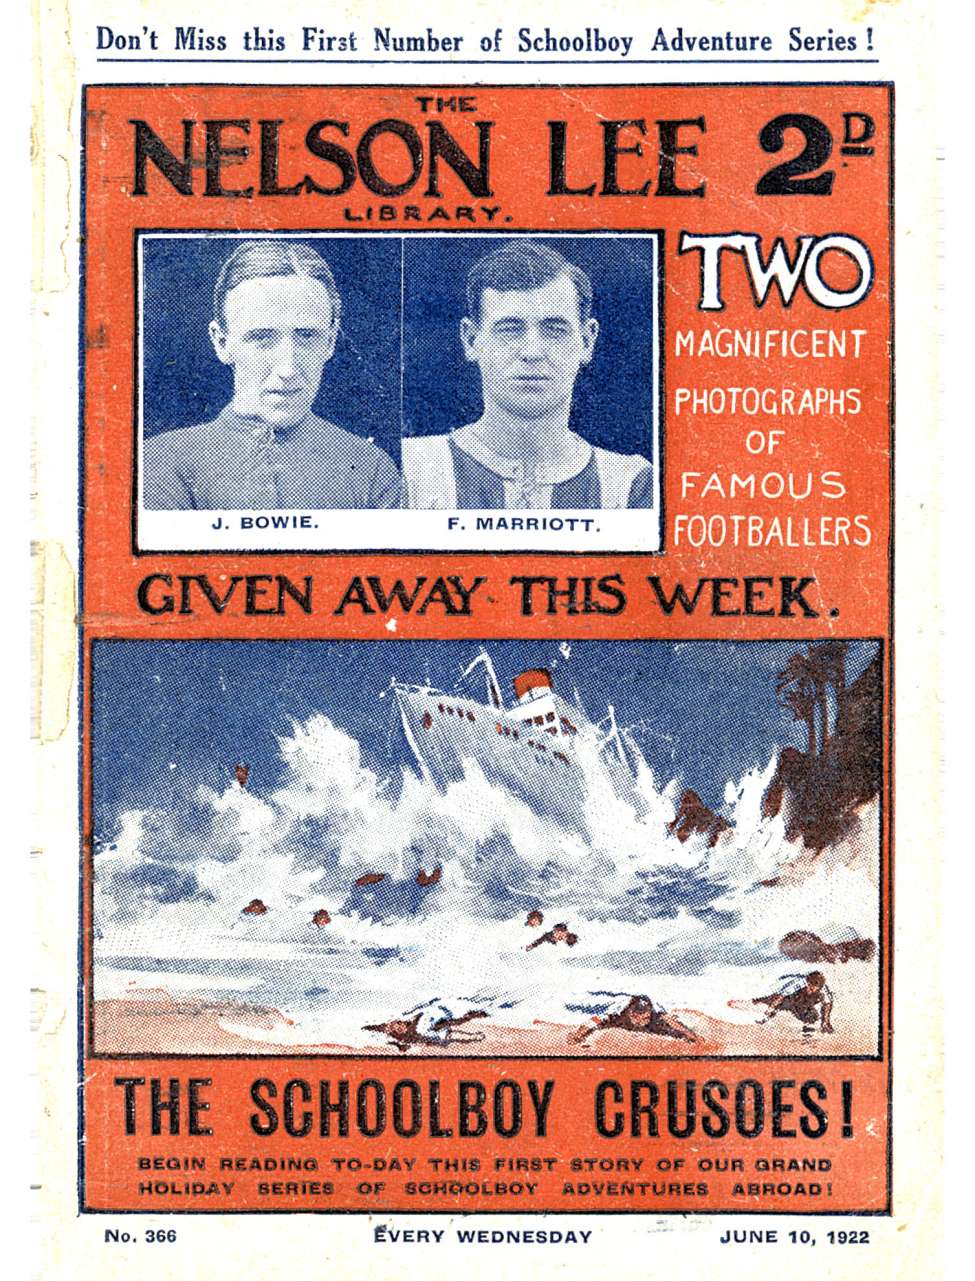 Book Cover For Nelson Lee Library s1 366 - The Schoolboy Crusoes